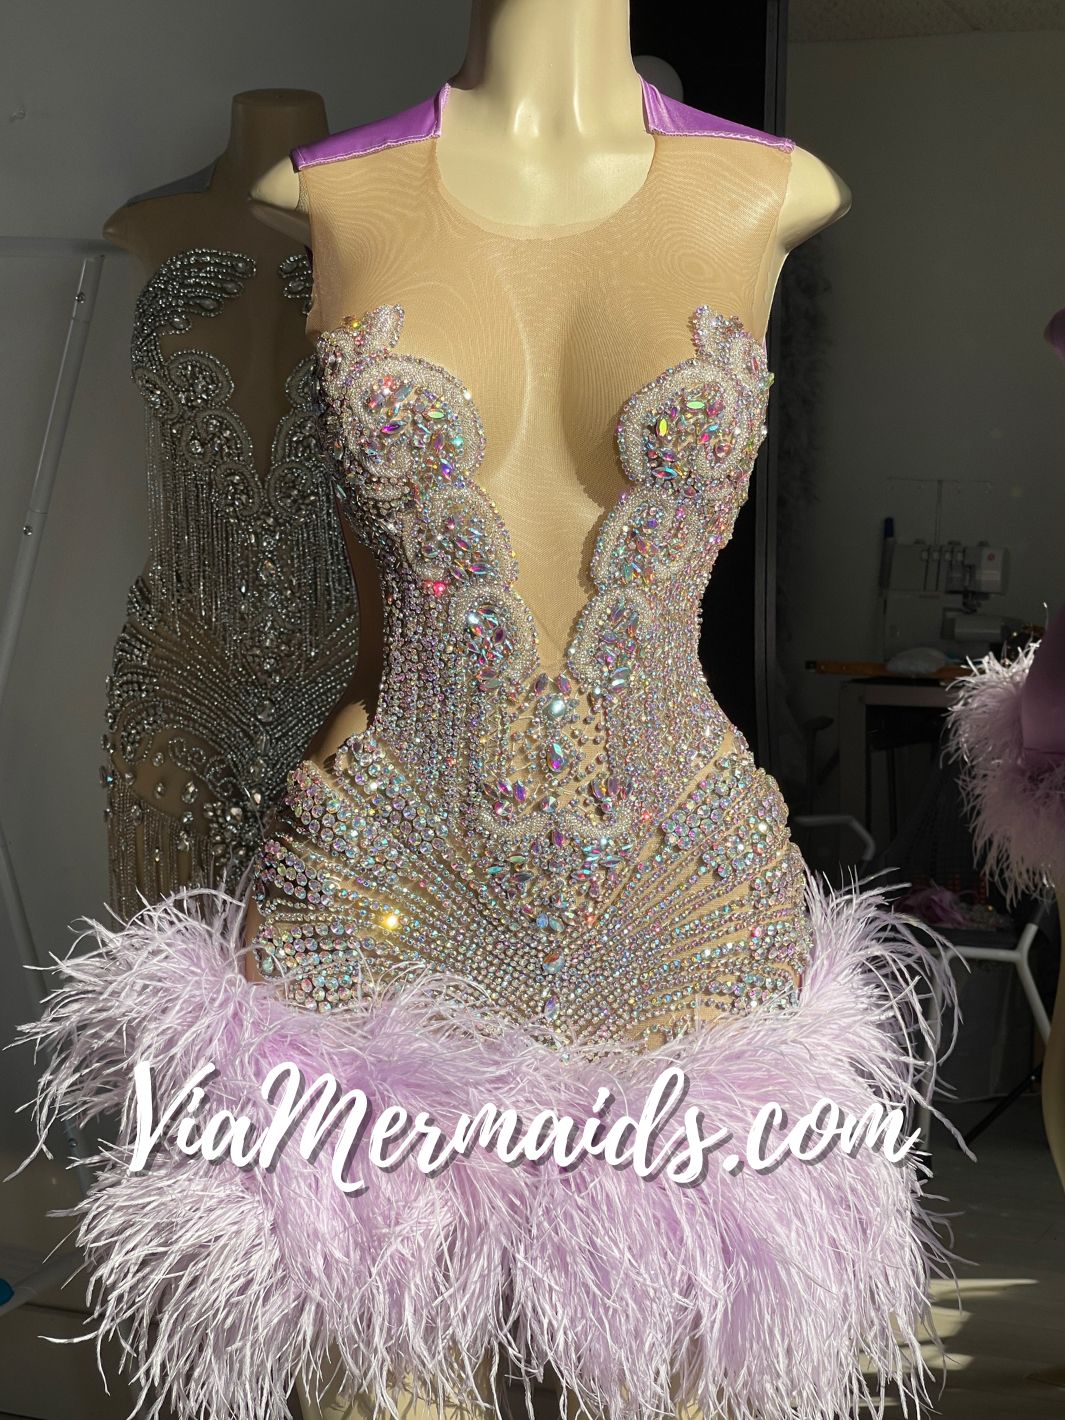 The Girl They LOVE TO HATE Iridescent Rhinestone Dress with Lilac Purple Feathers